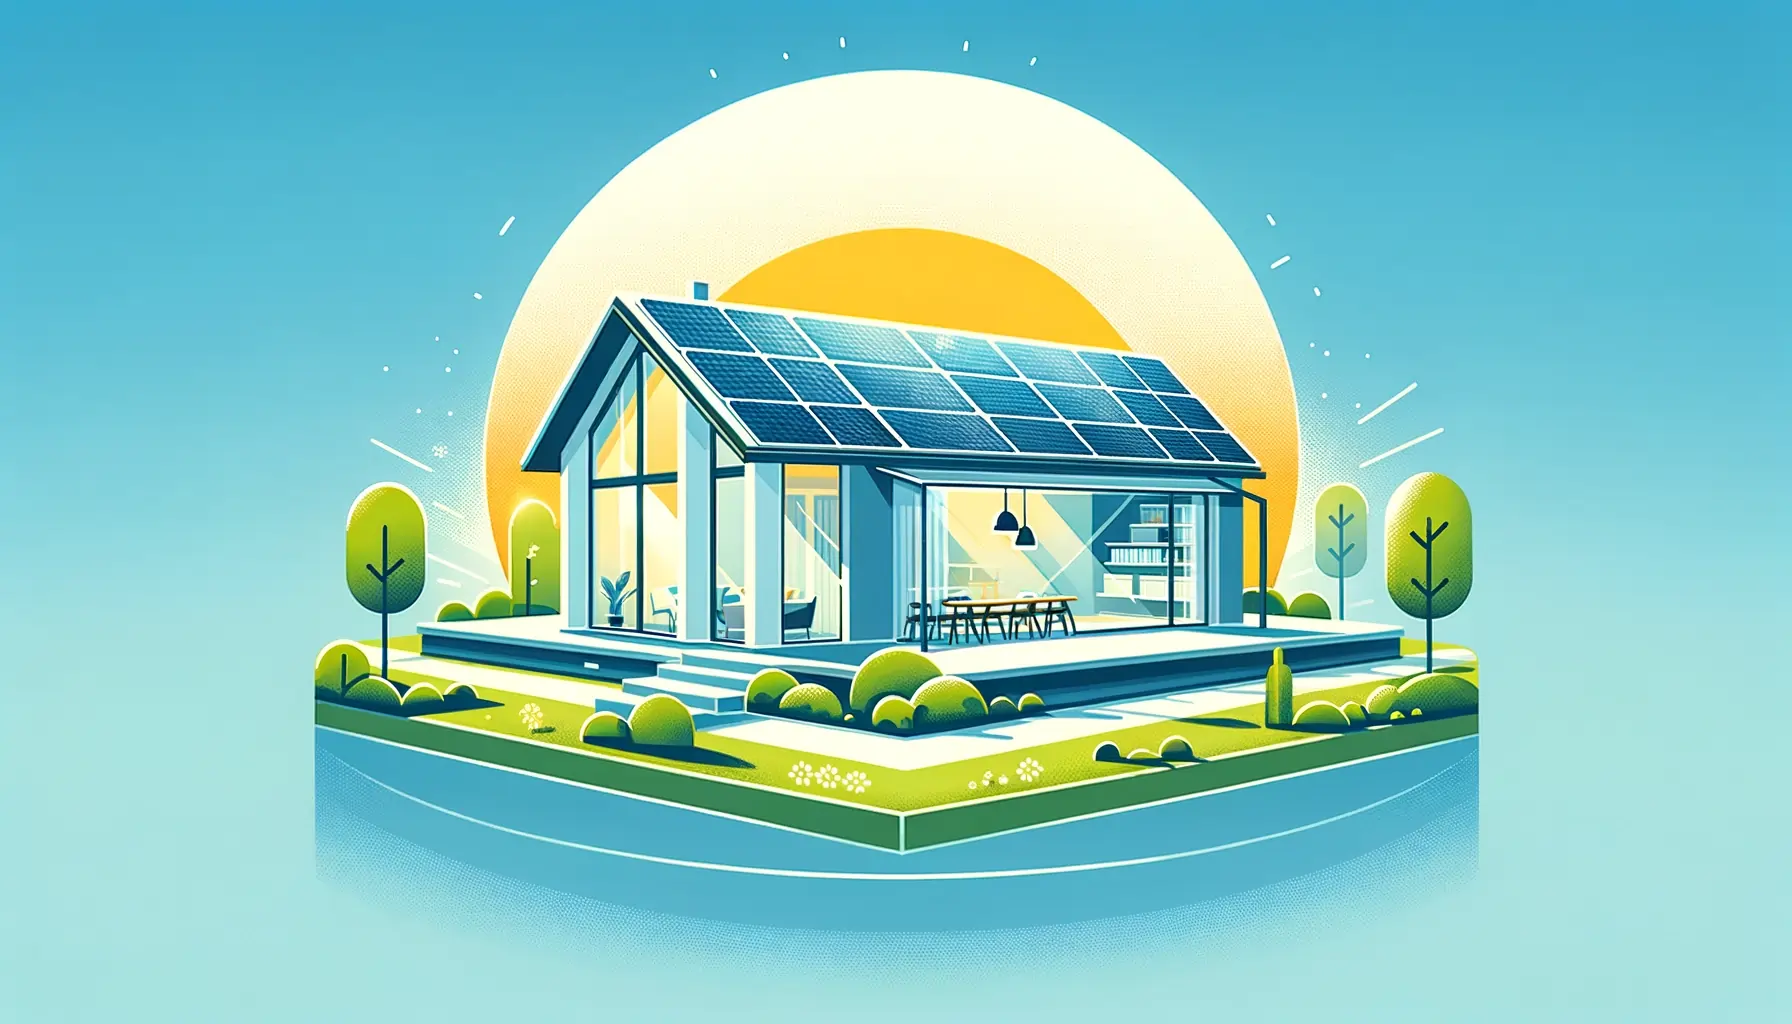 Some Things to Consider When Buying a Solar Power System